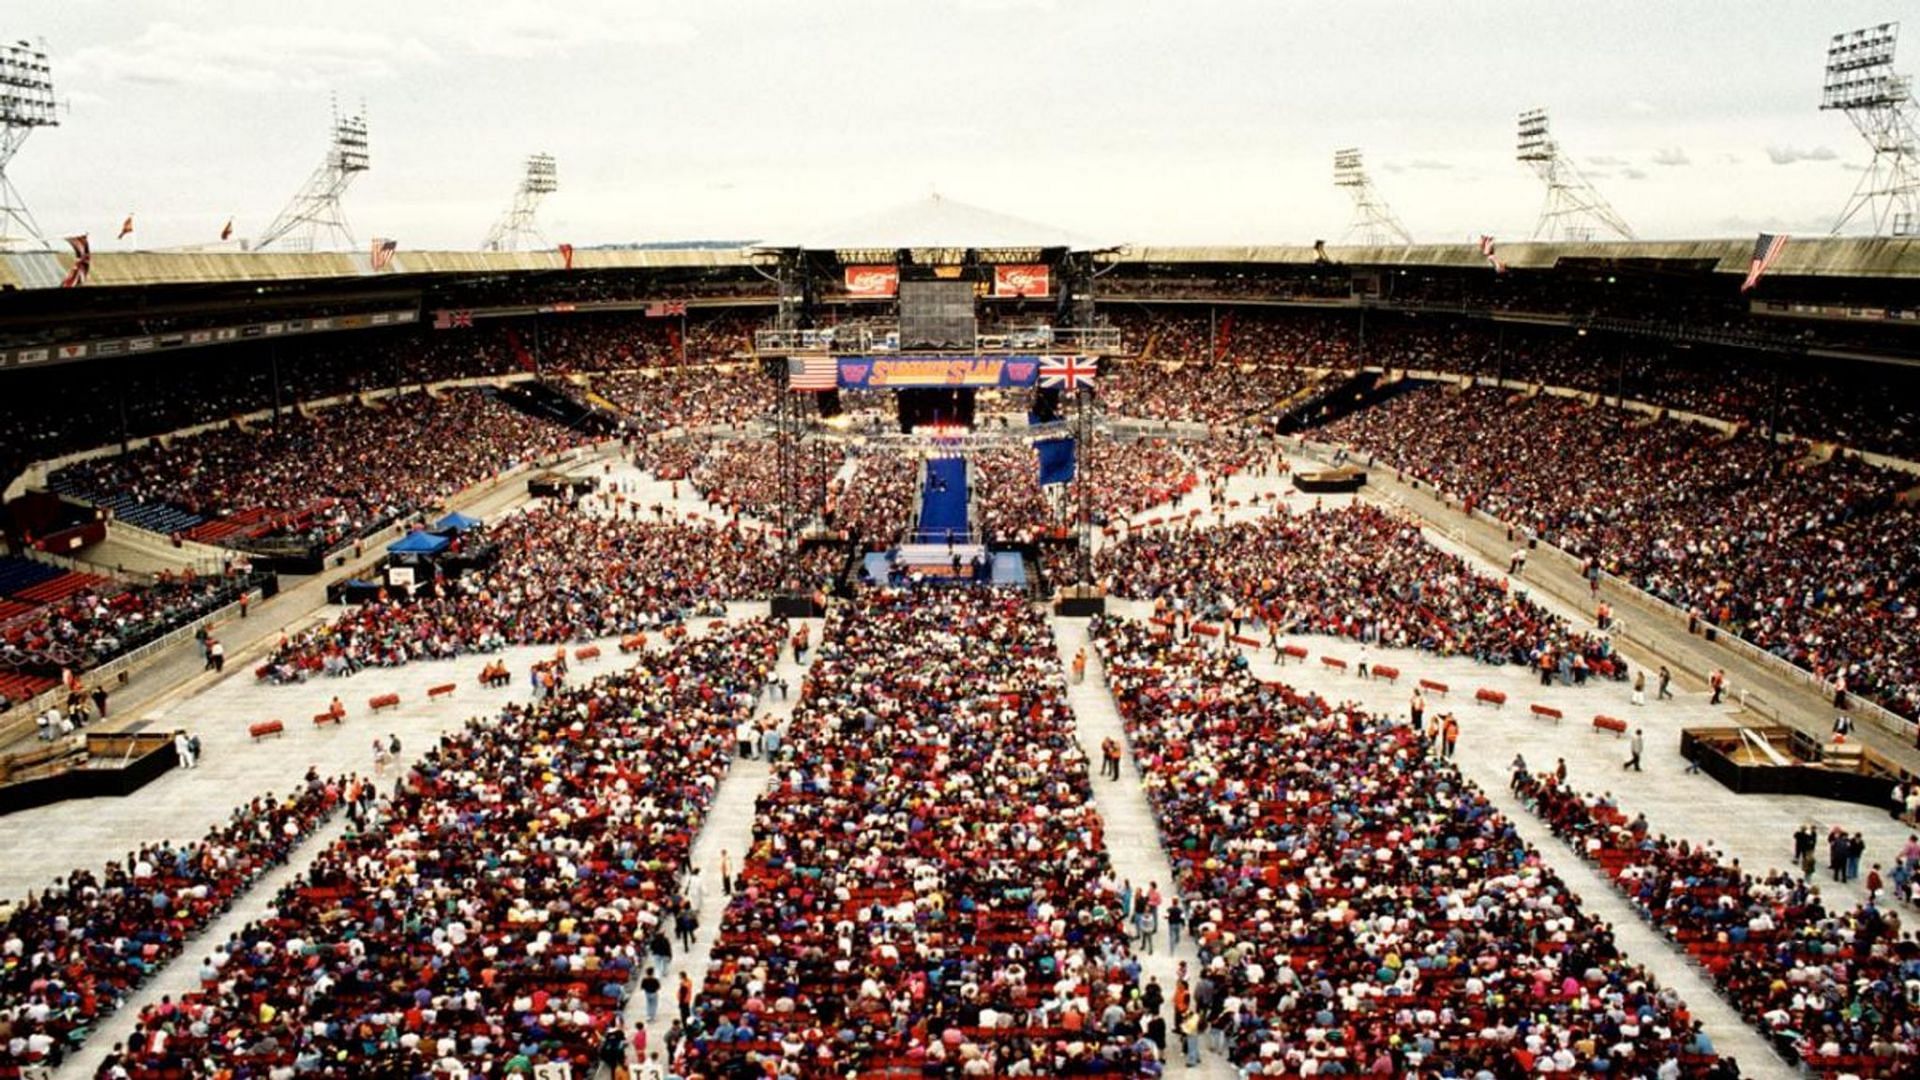 Wembley Stadium was packed for SummerSlam 1992